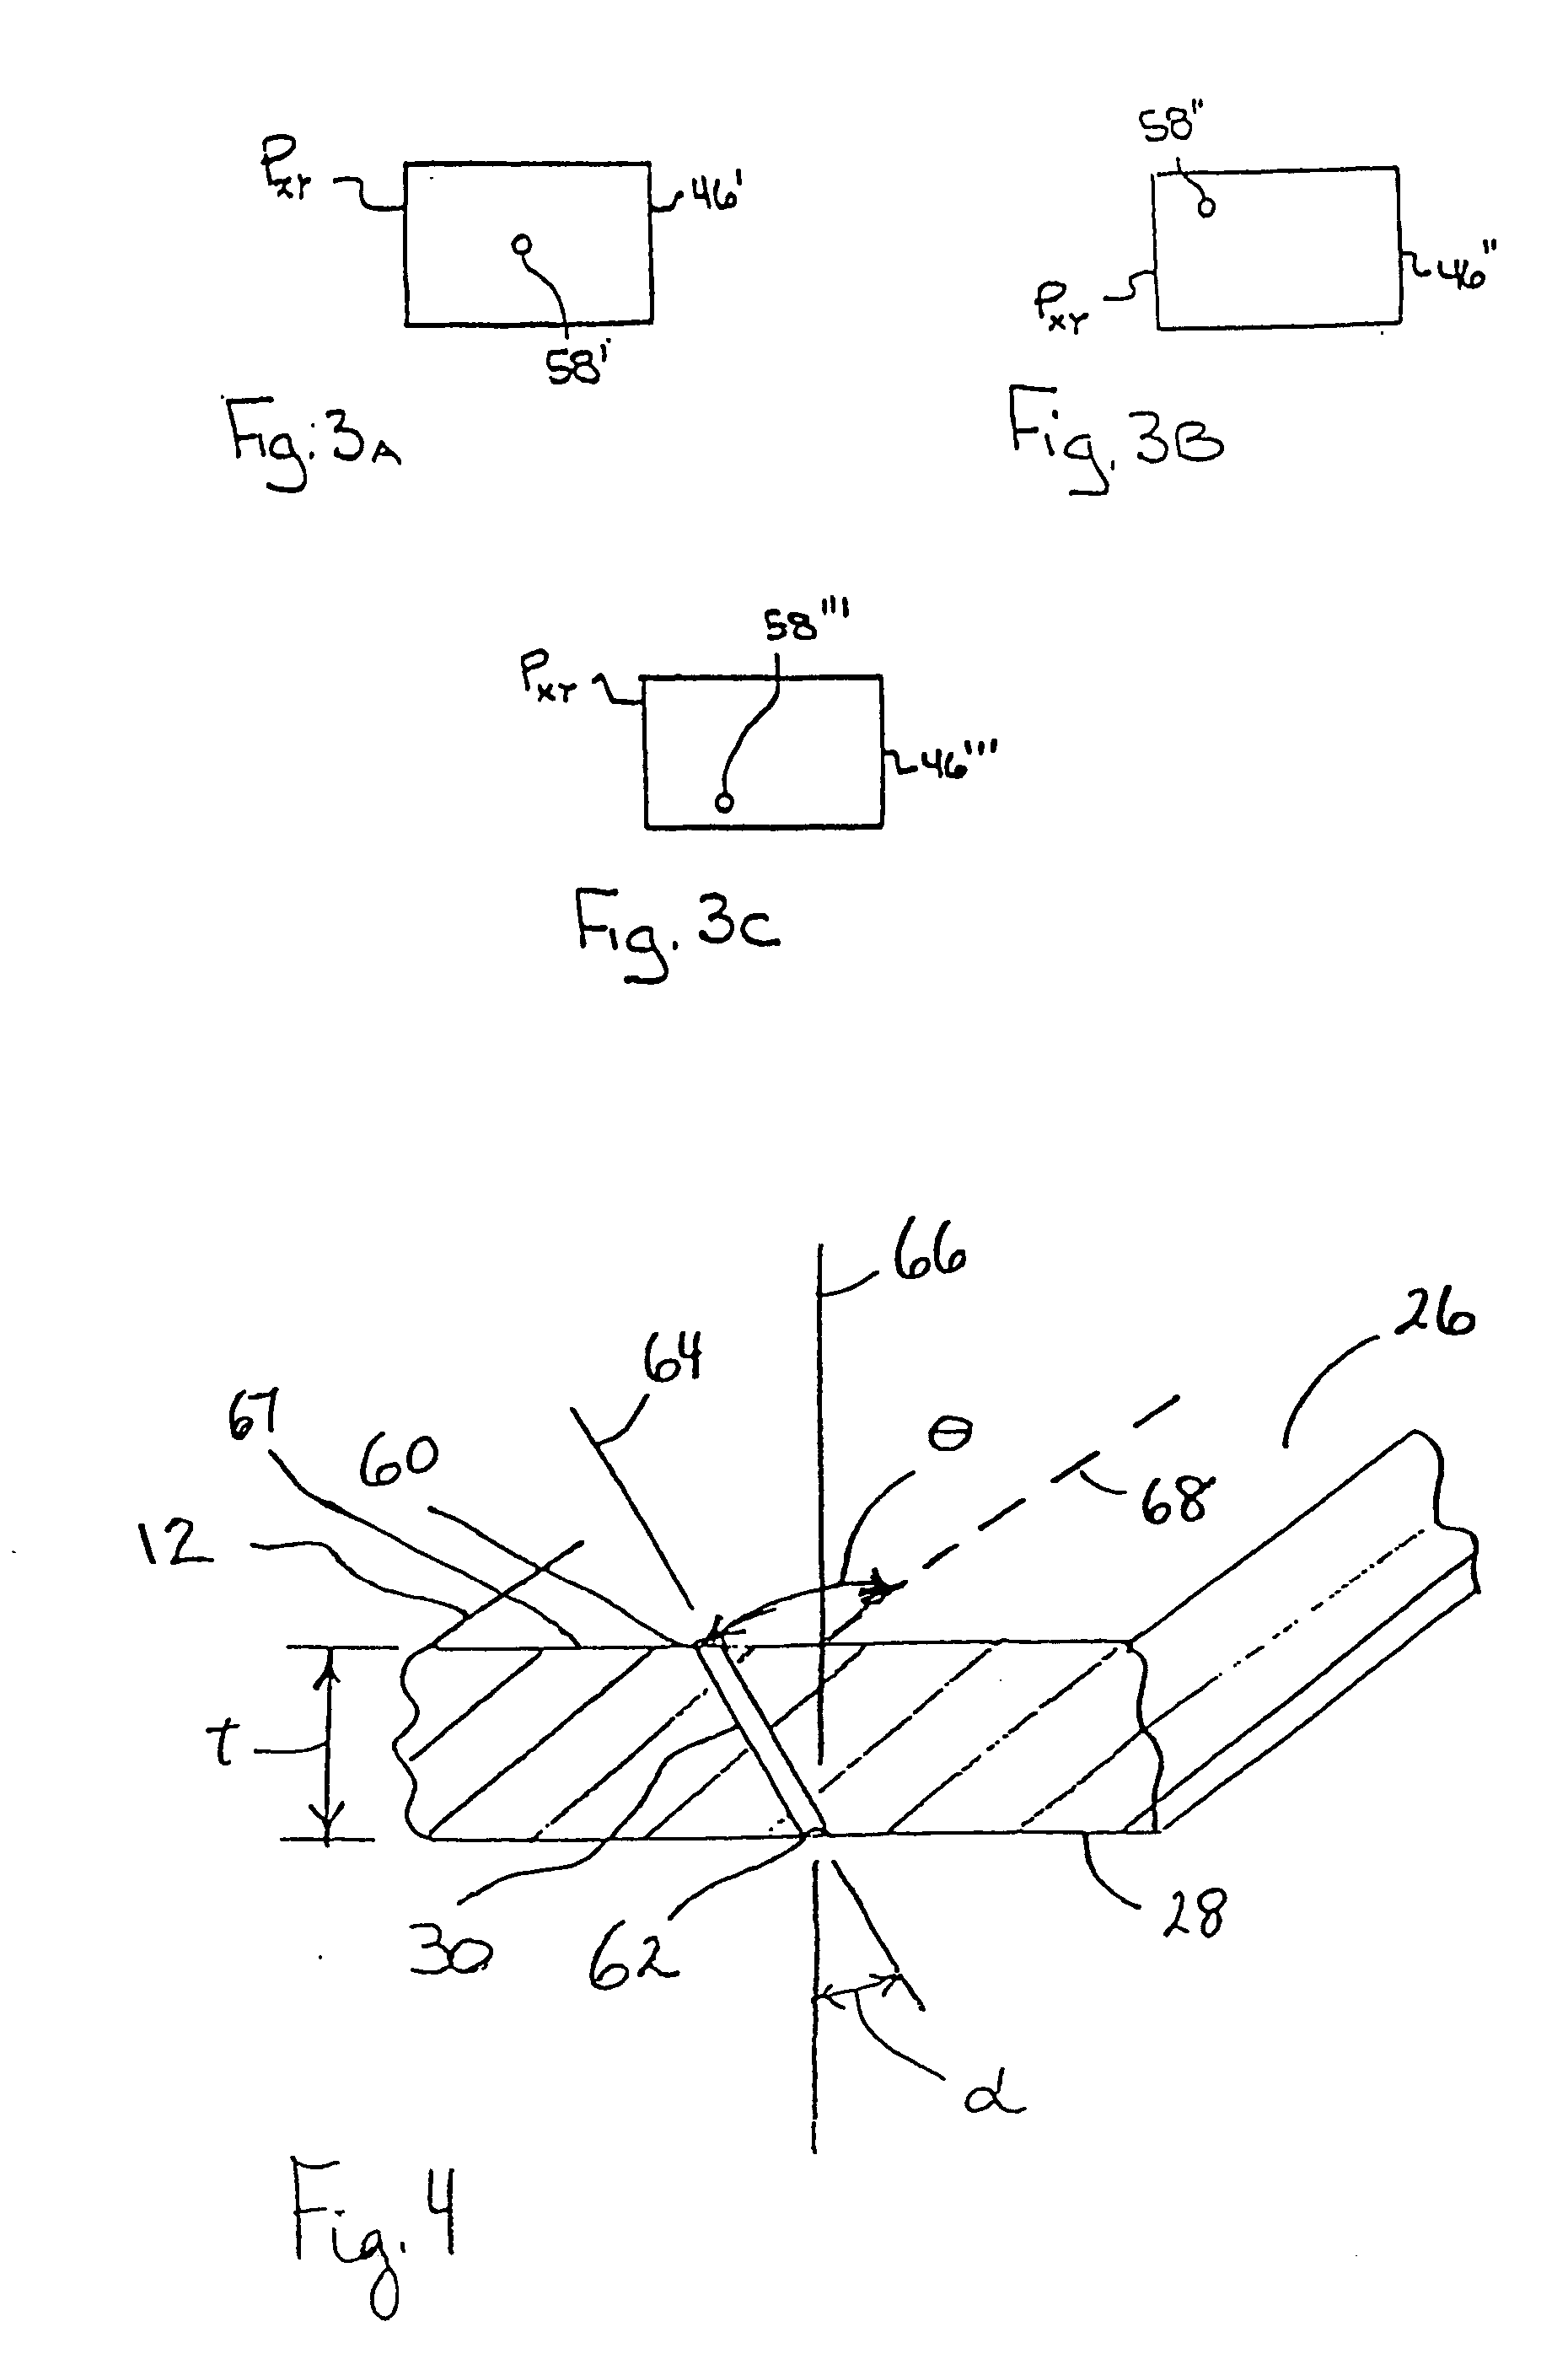 Positioning system for moving a selected station of a holding plate to a predetermined location for interaction with a probe